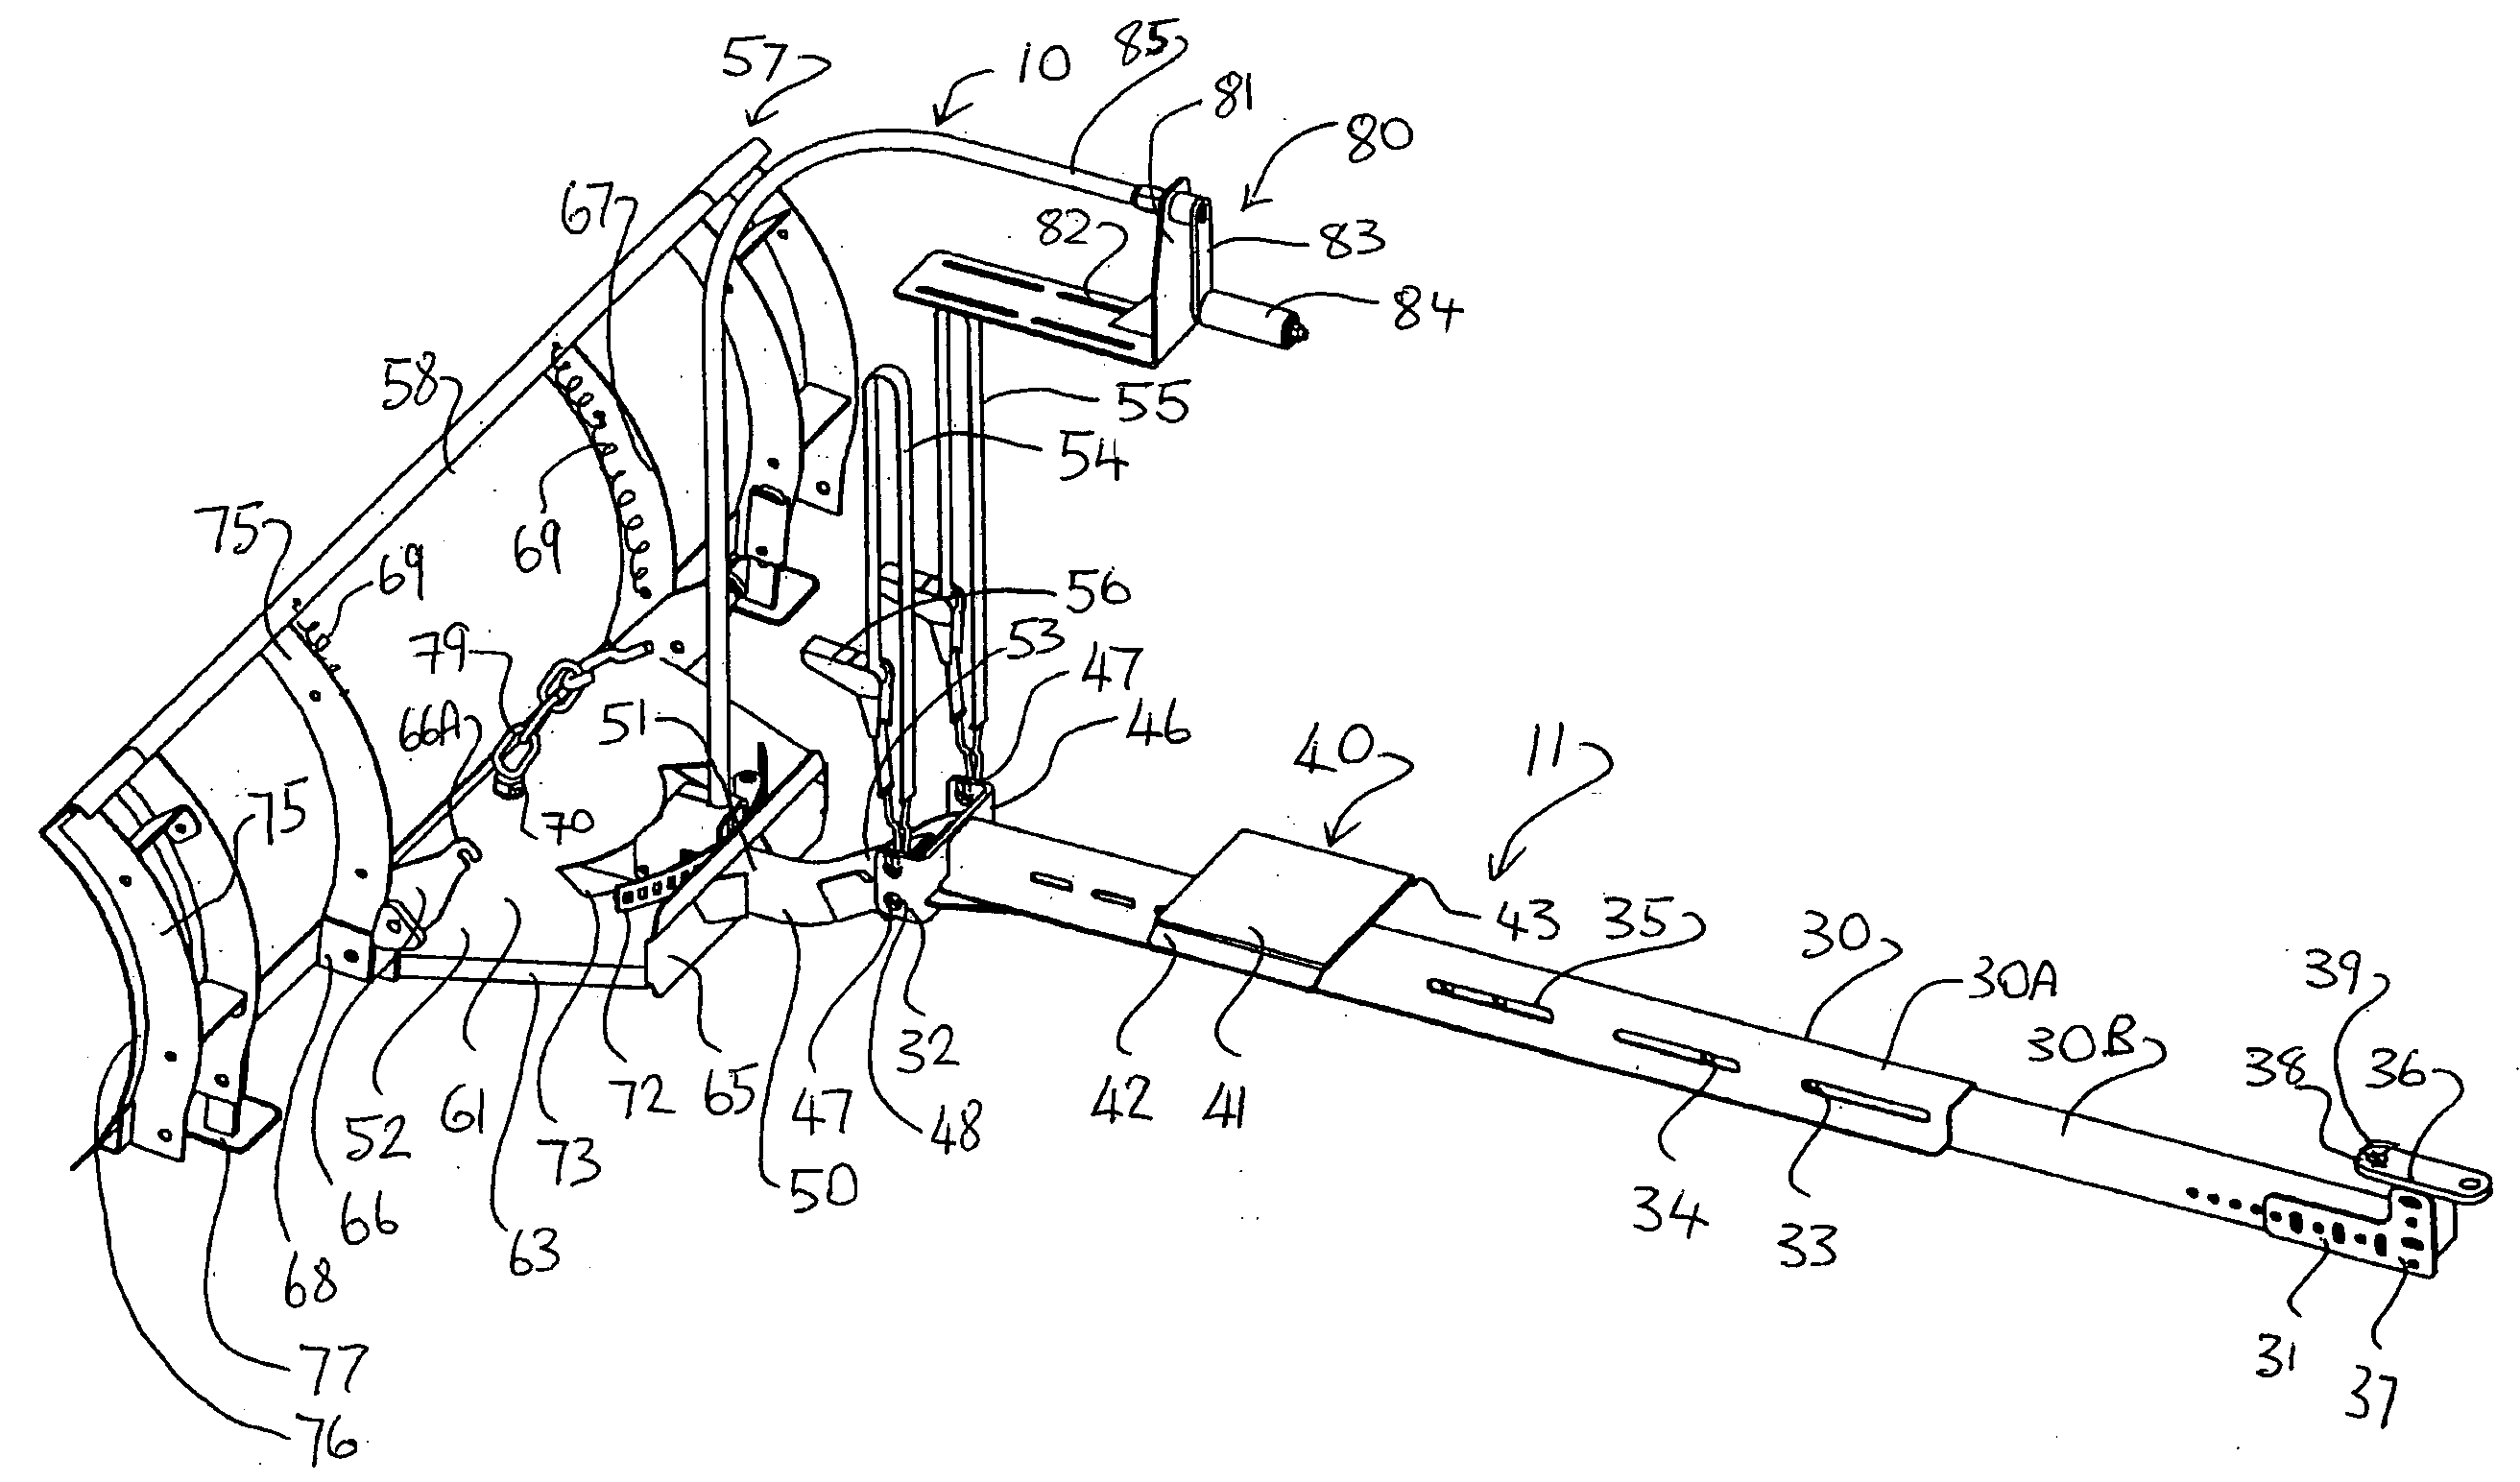 Mounting of an accessory on an ATV